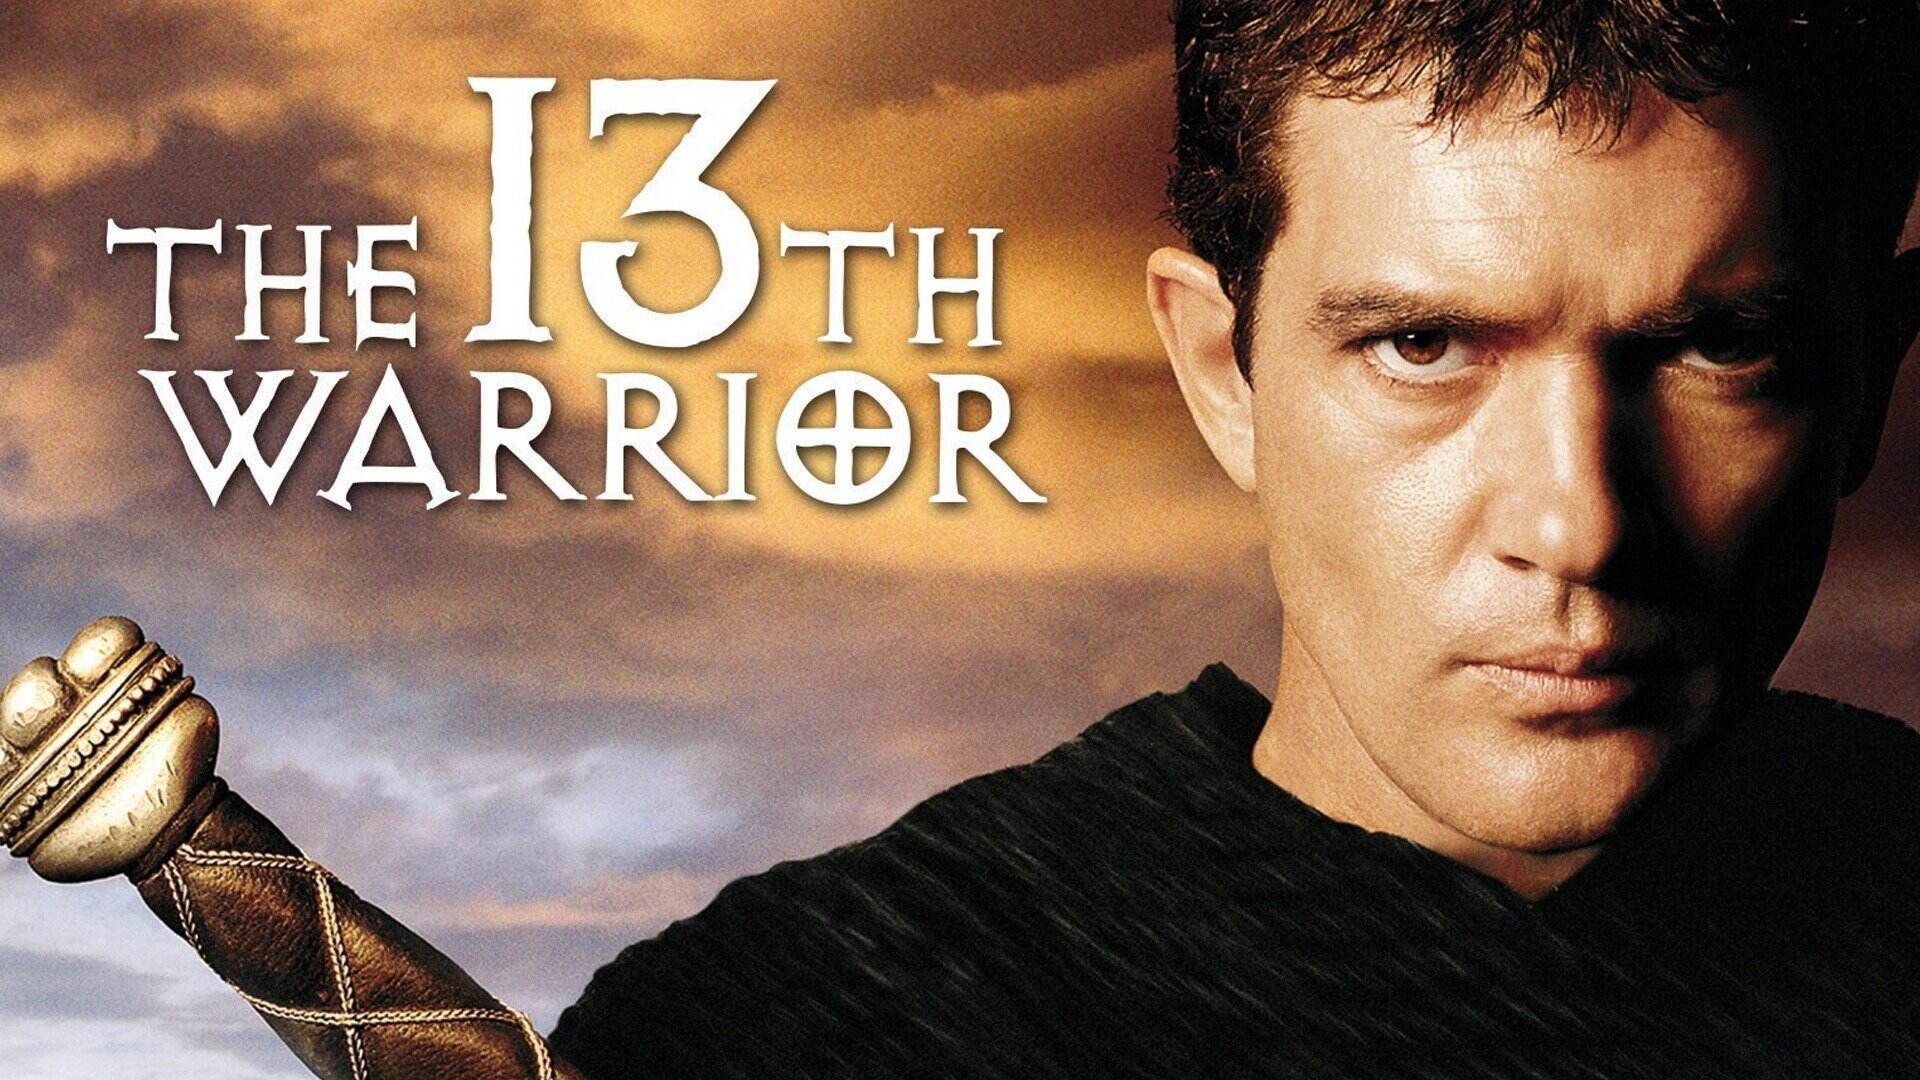 41-facts-about-the-movie-the-13th-warrior